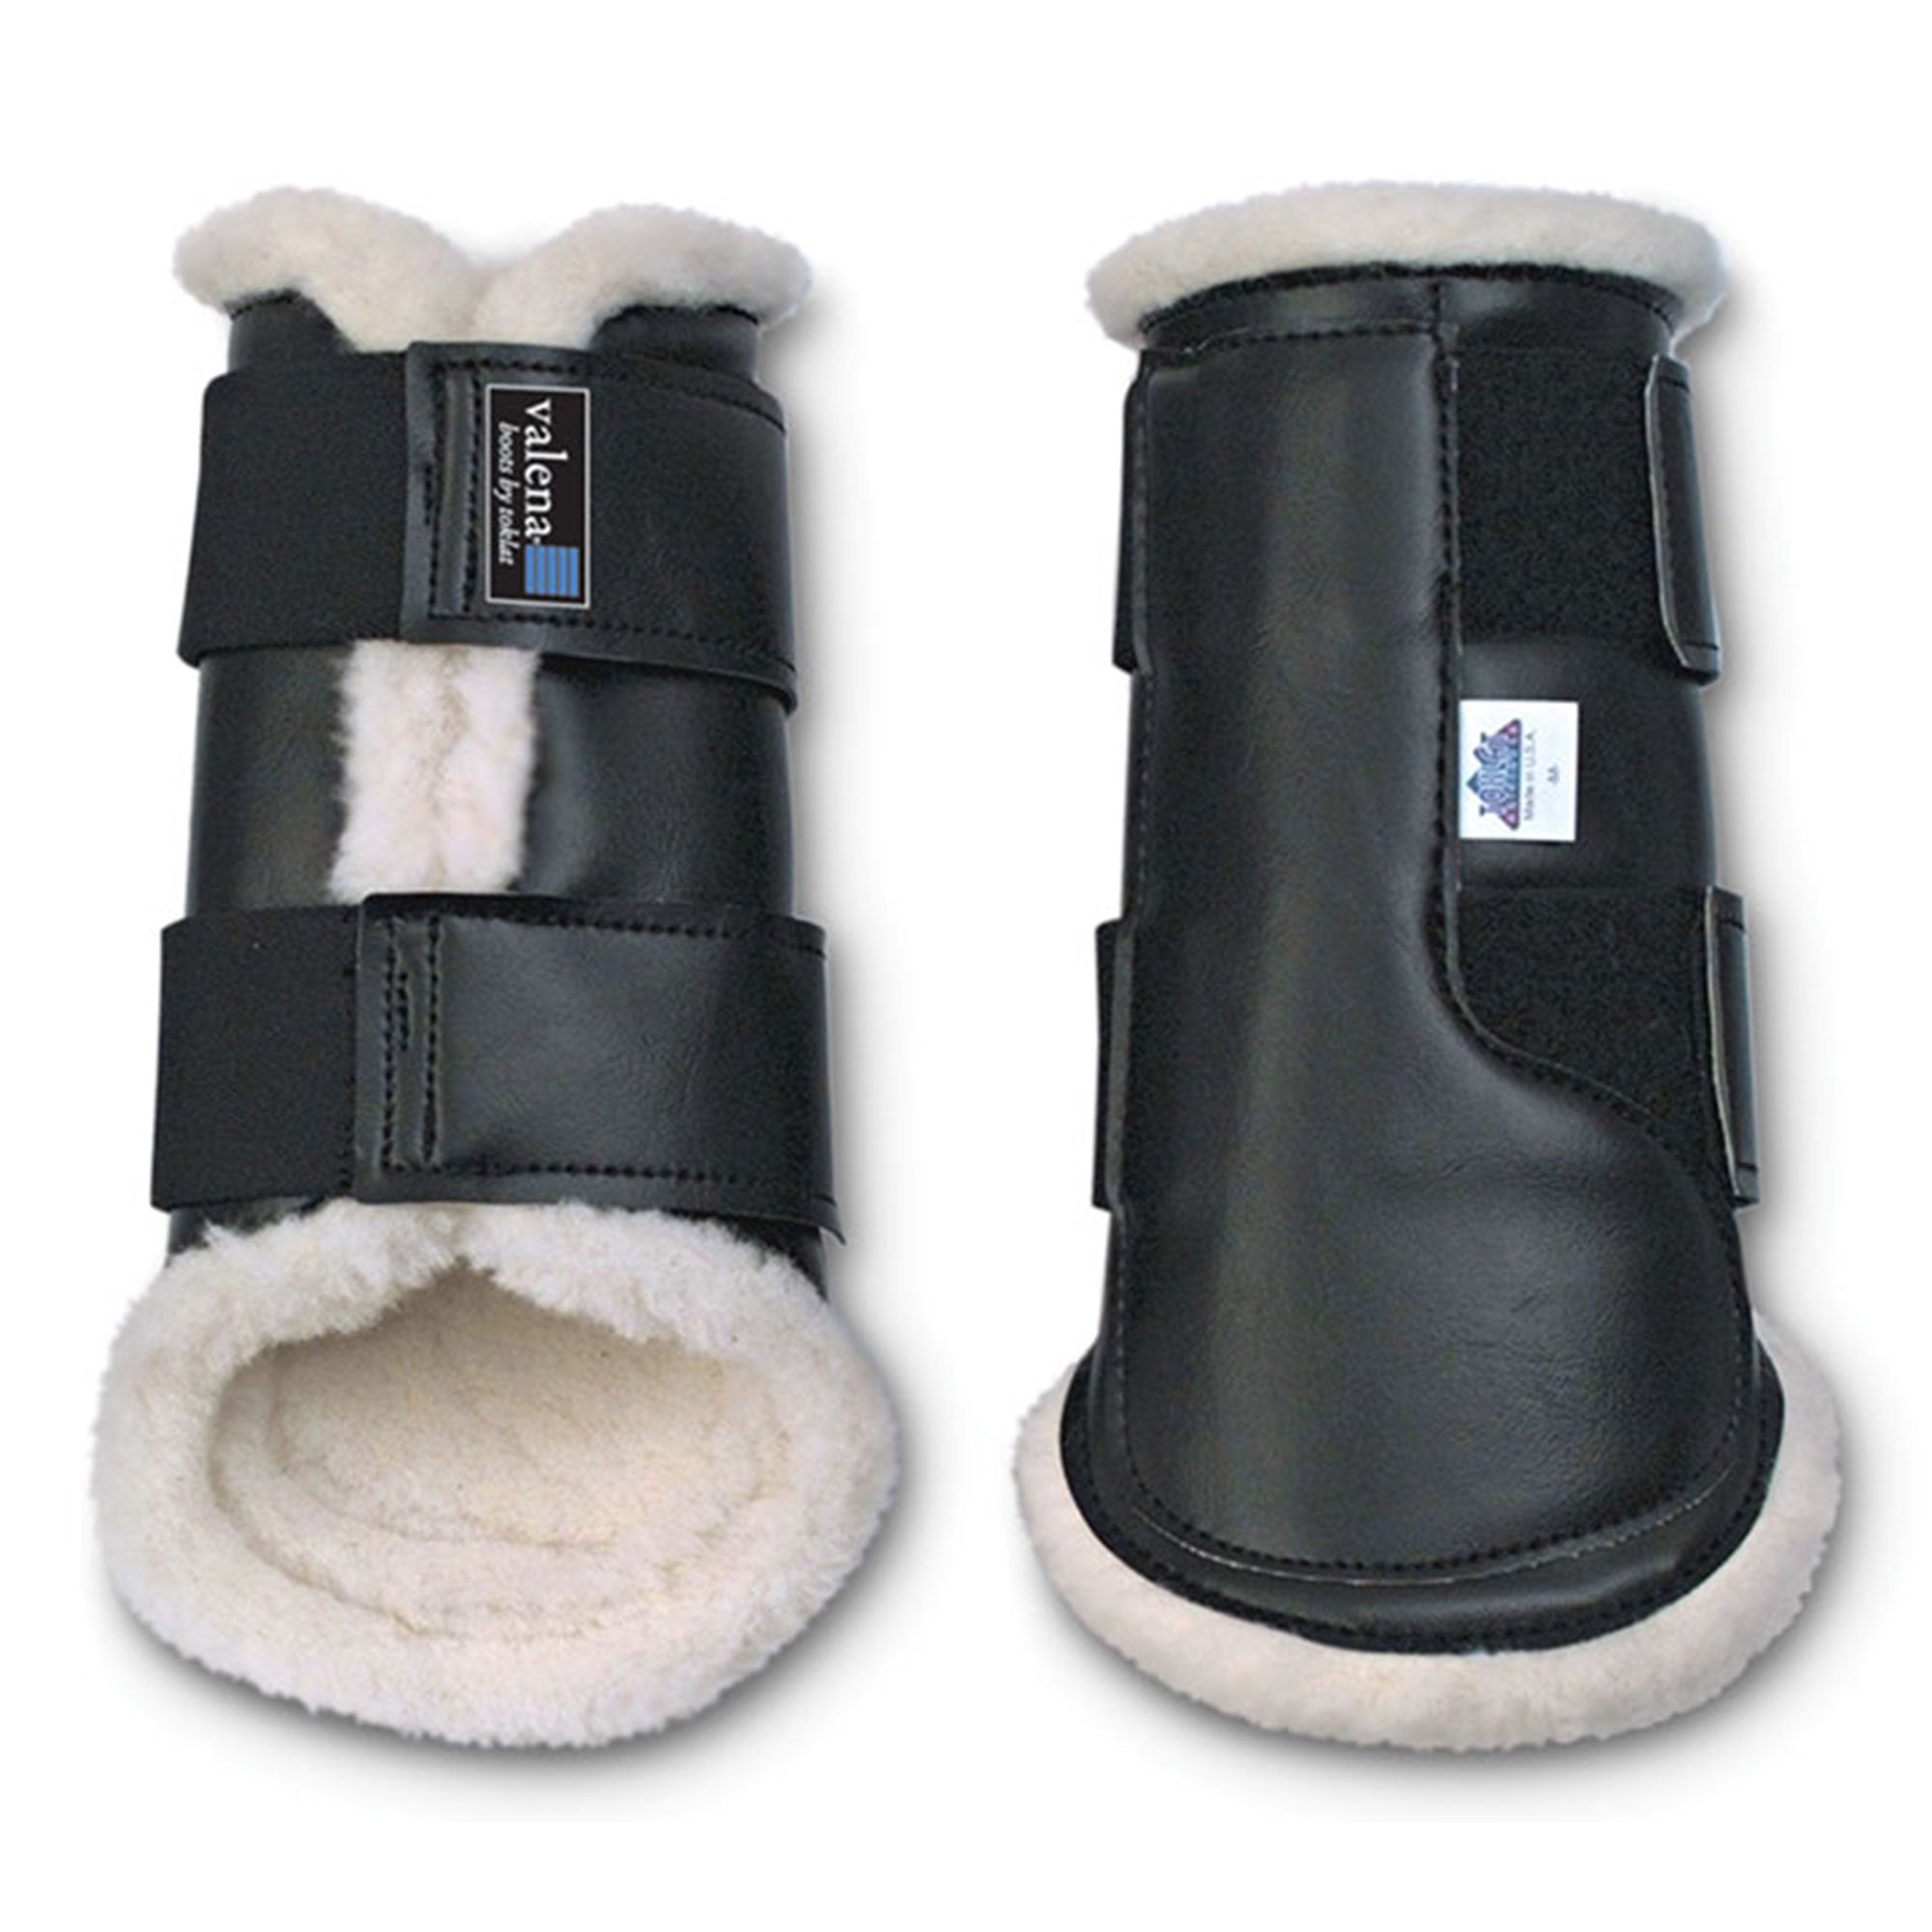 Boots & Wraps – Horse & Rider